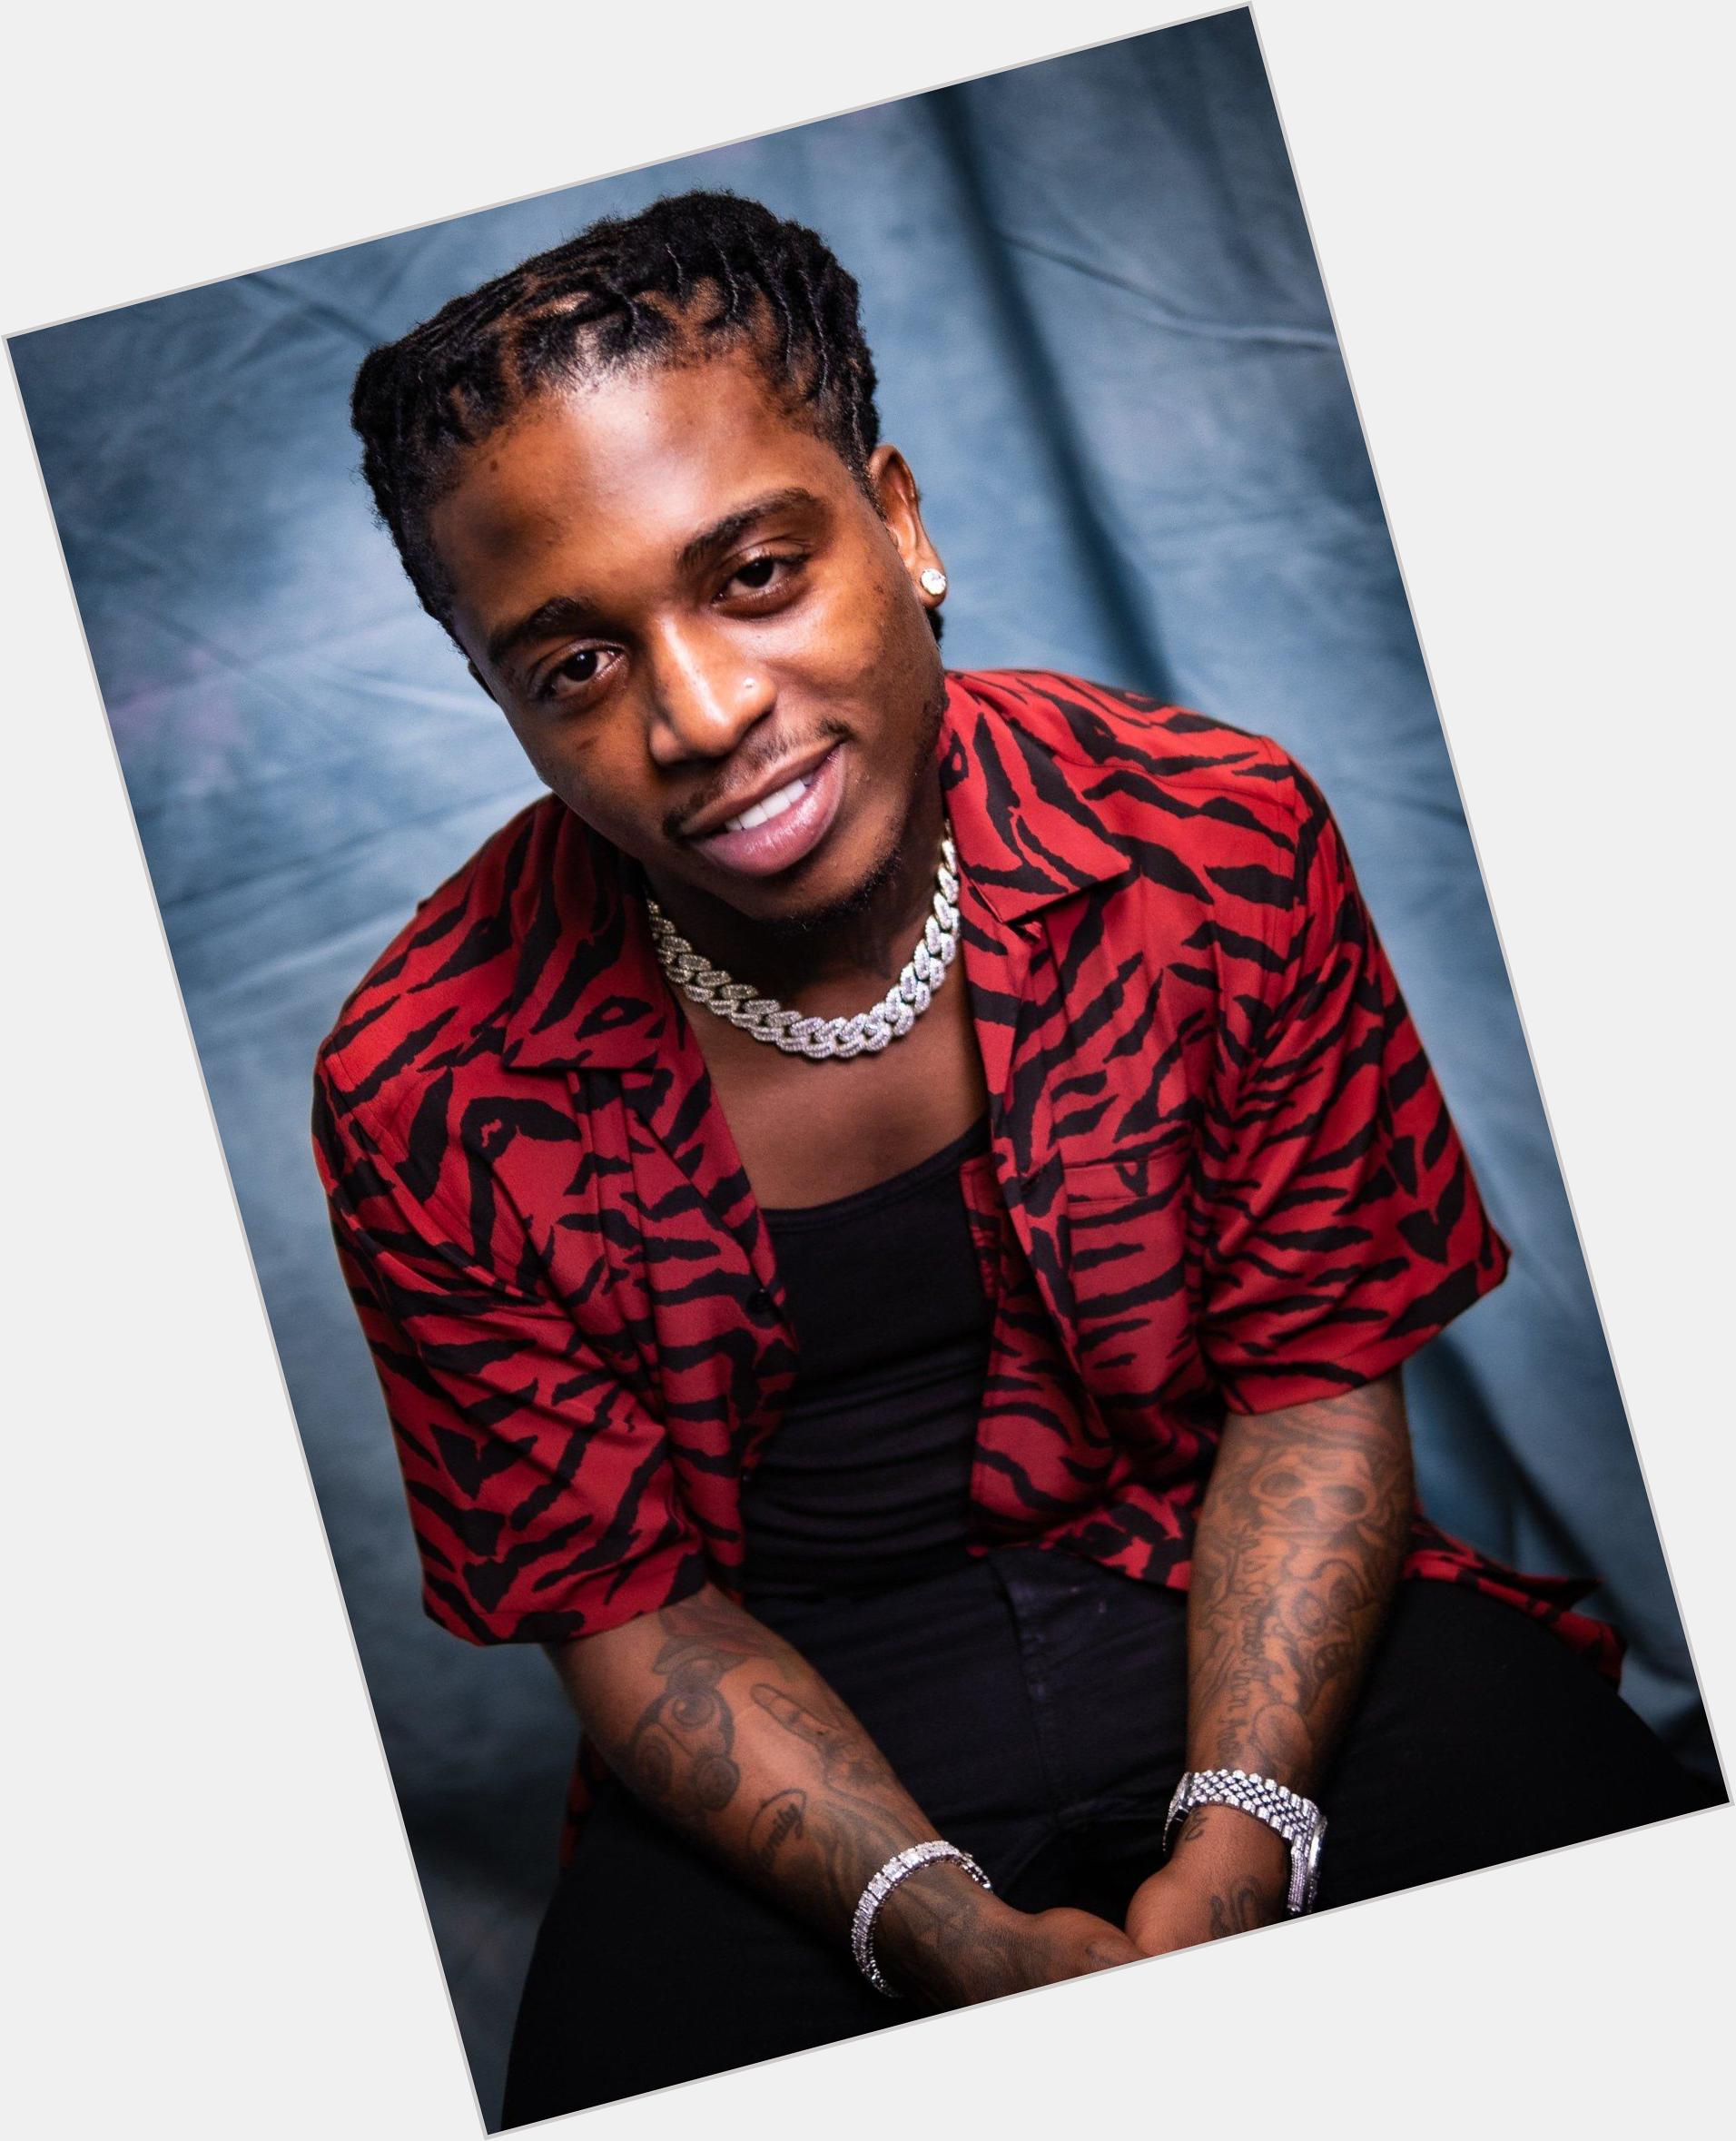 Jacquees dating 2